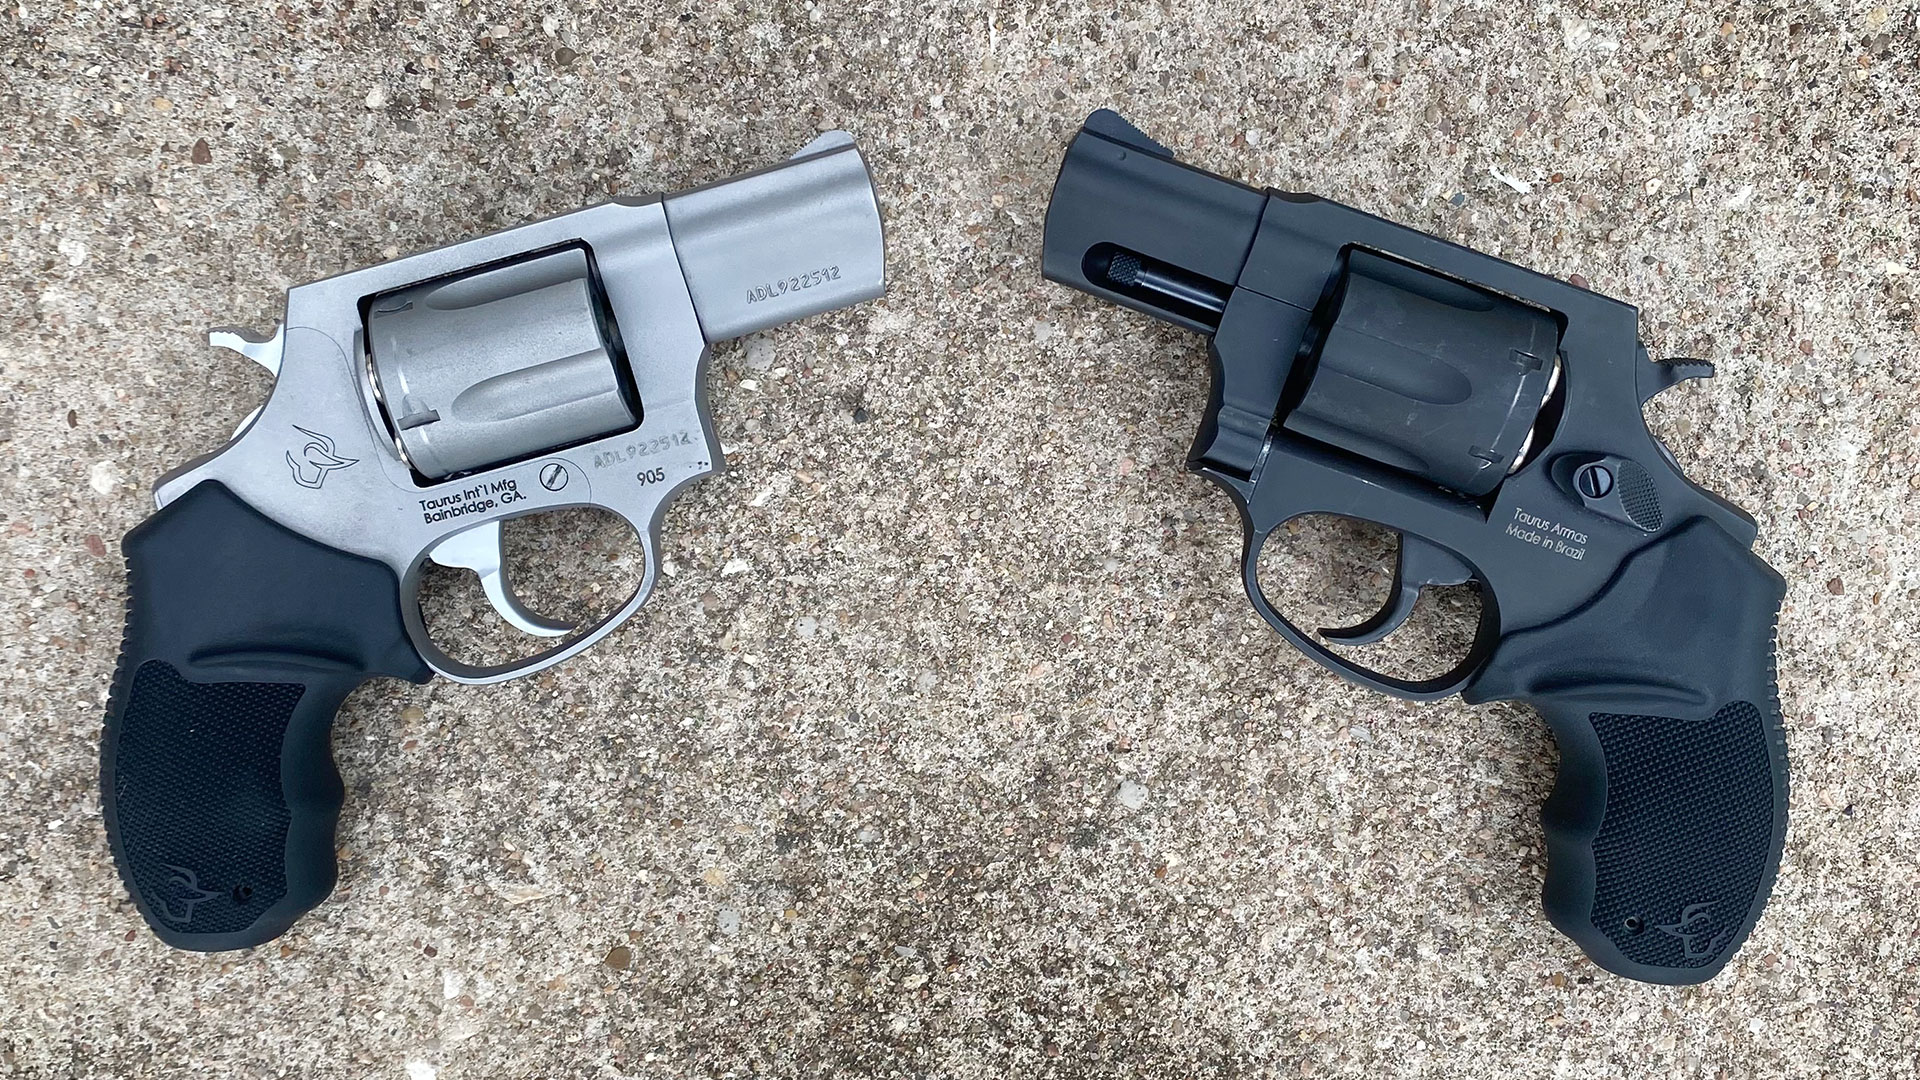 38 S&W vs. 38 Special - What's the Difference?